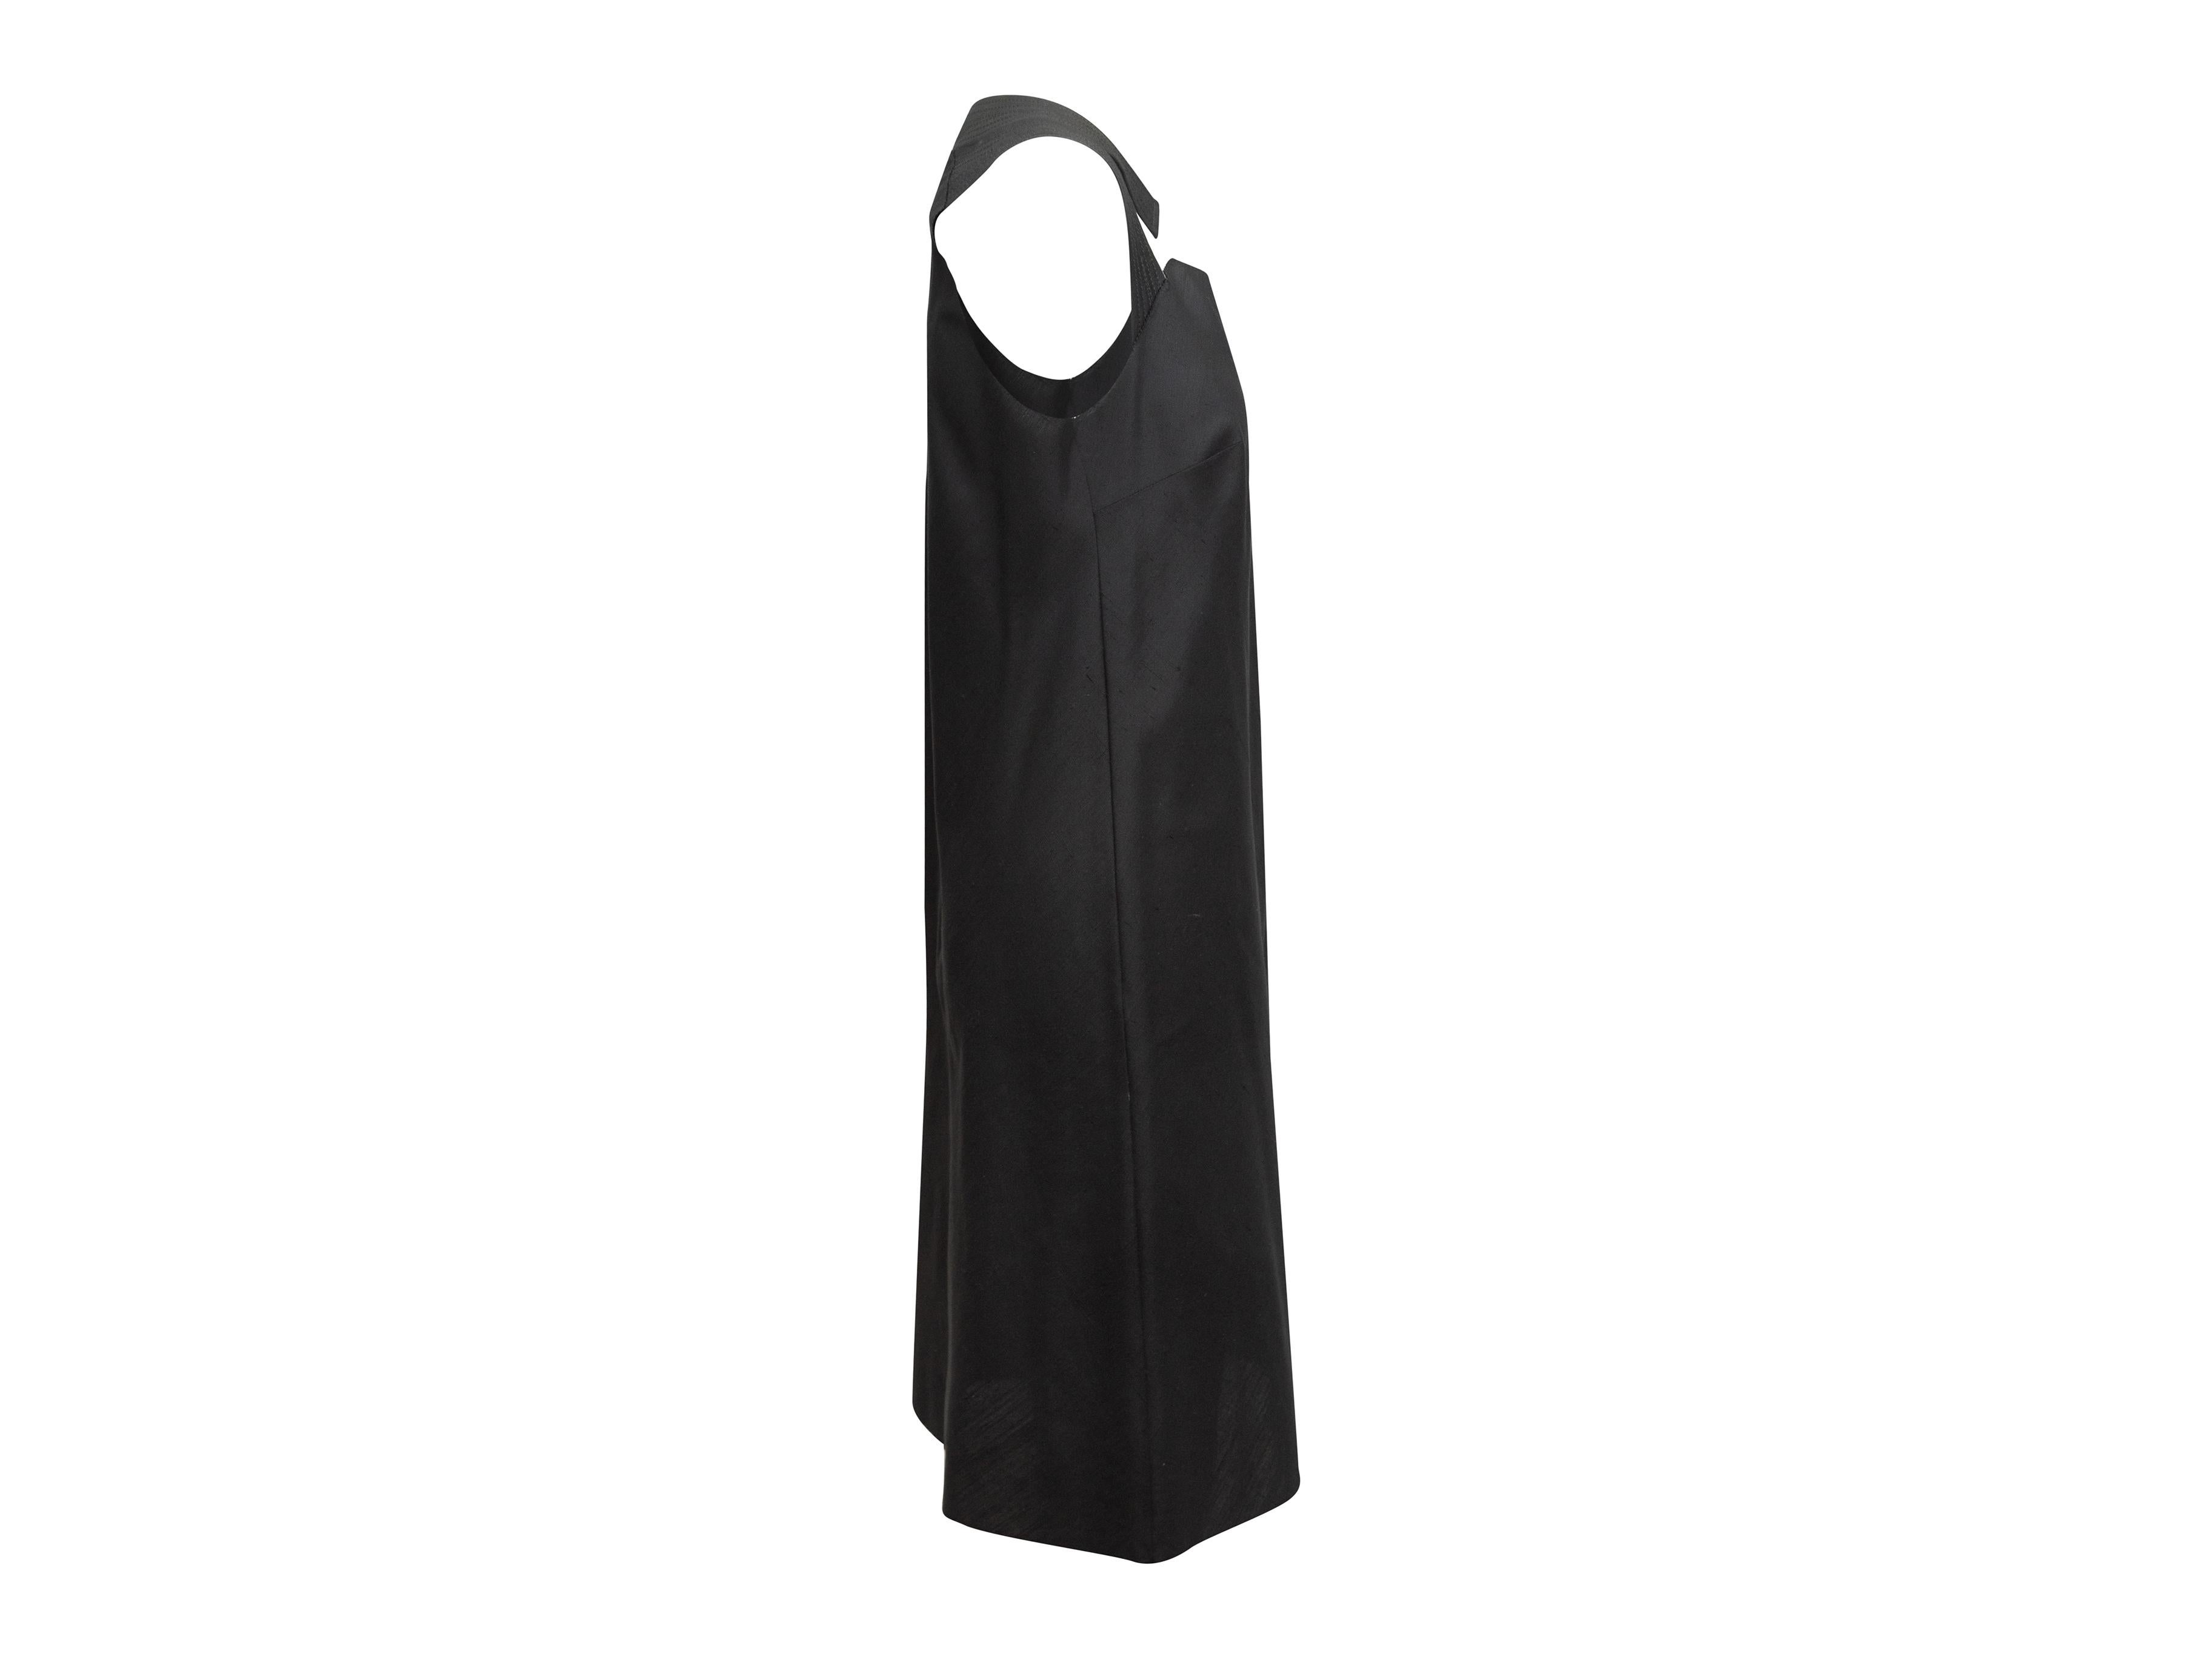 Product details: Black sleeveless silk dress by Nina Ricci. Scoop neck. Cutouts at bust. 35